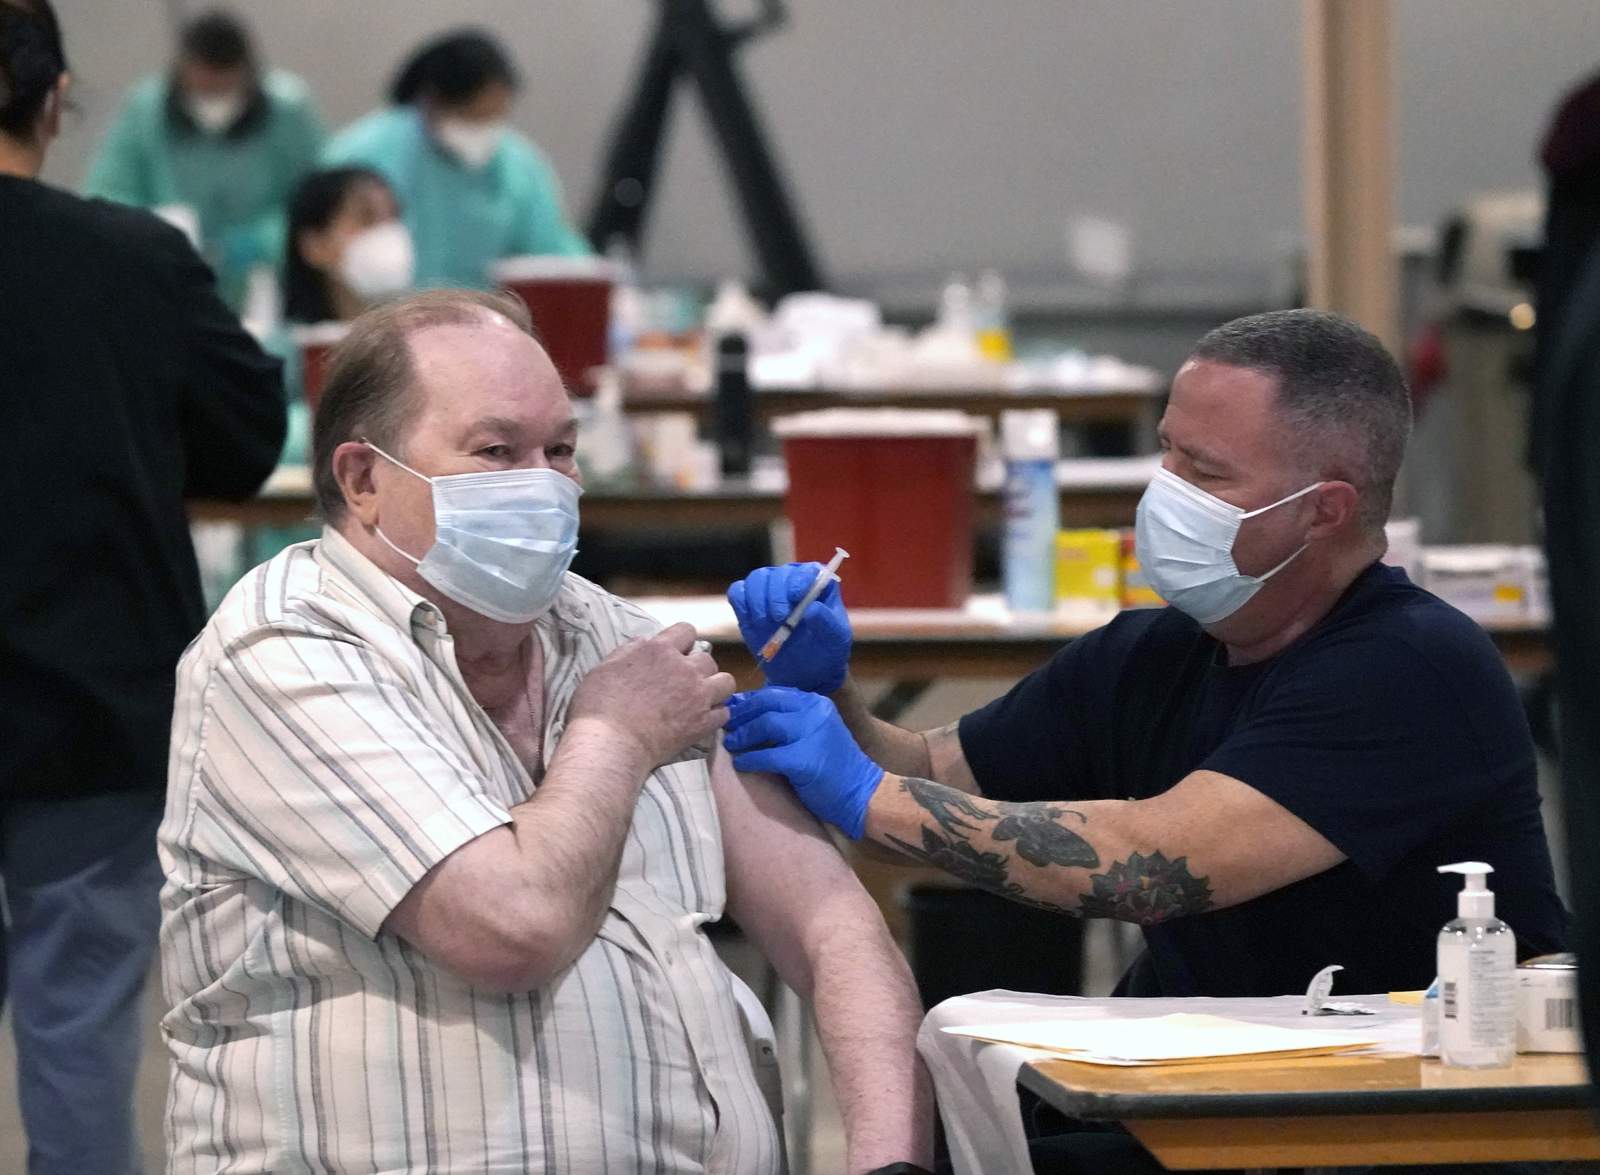 Texas likely to partner with FEMA for vaccine ‘super sites’